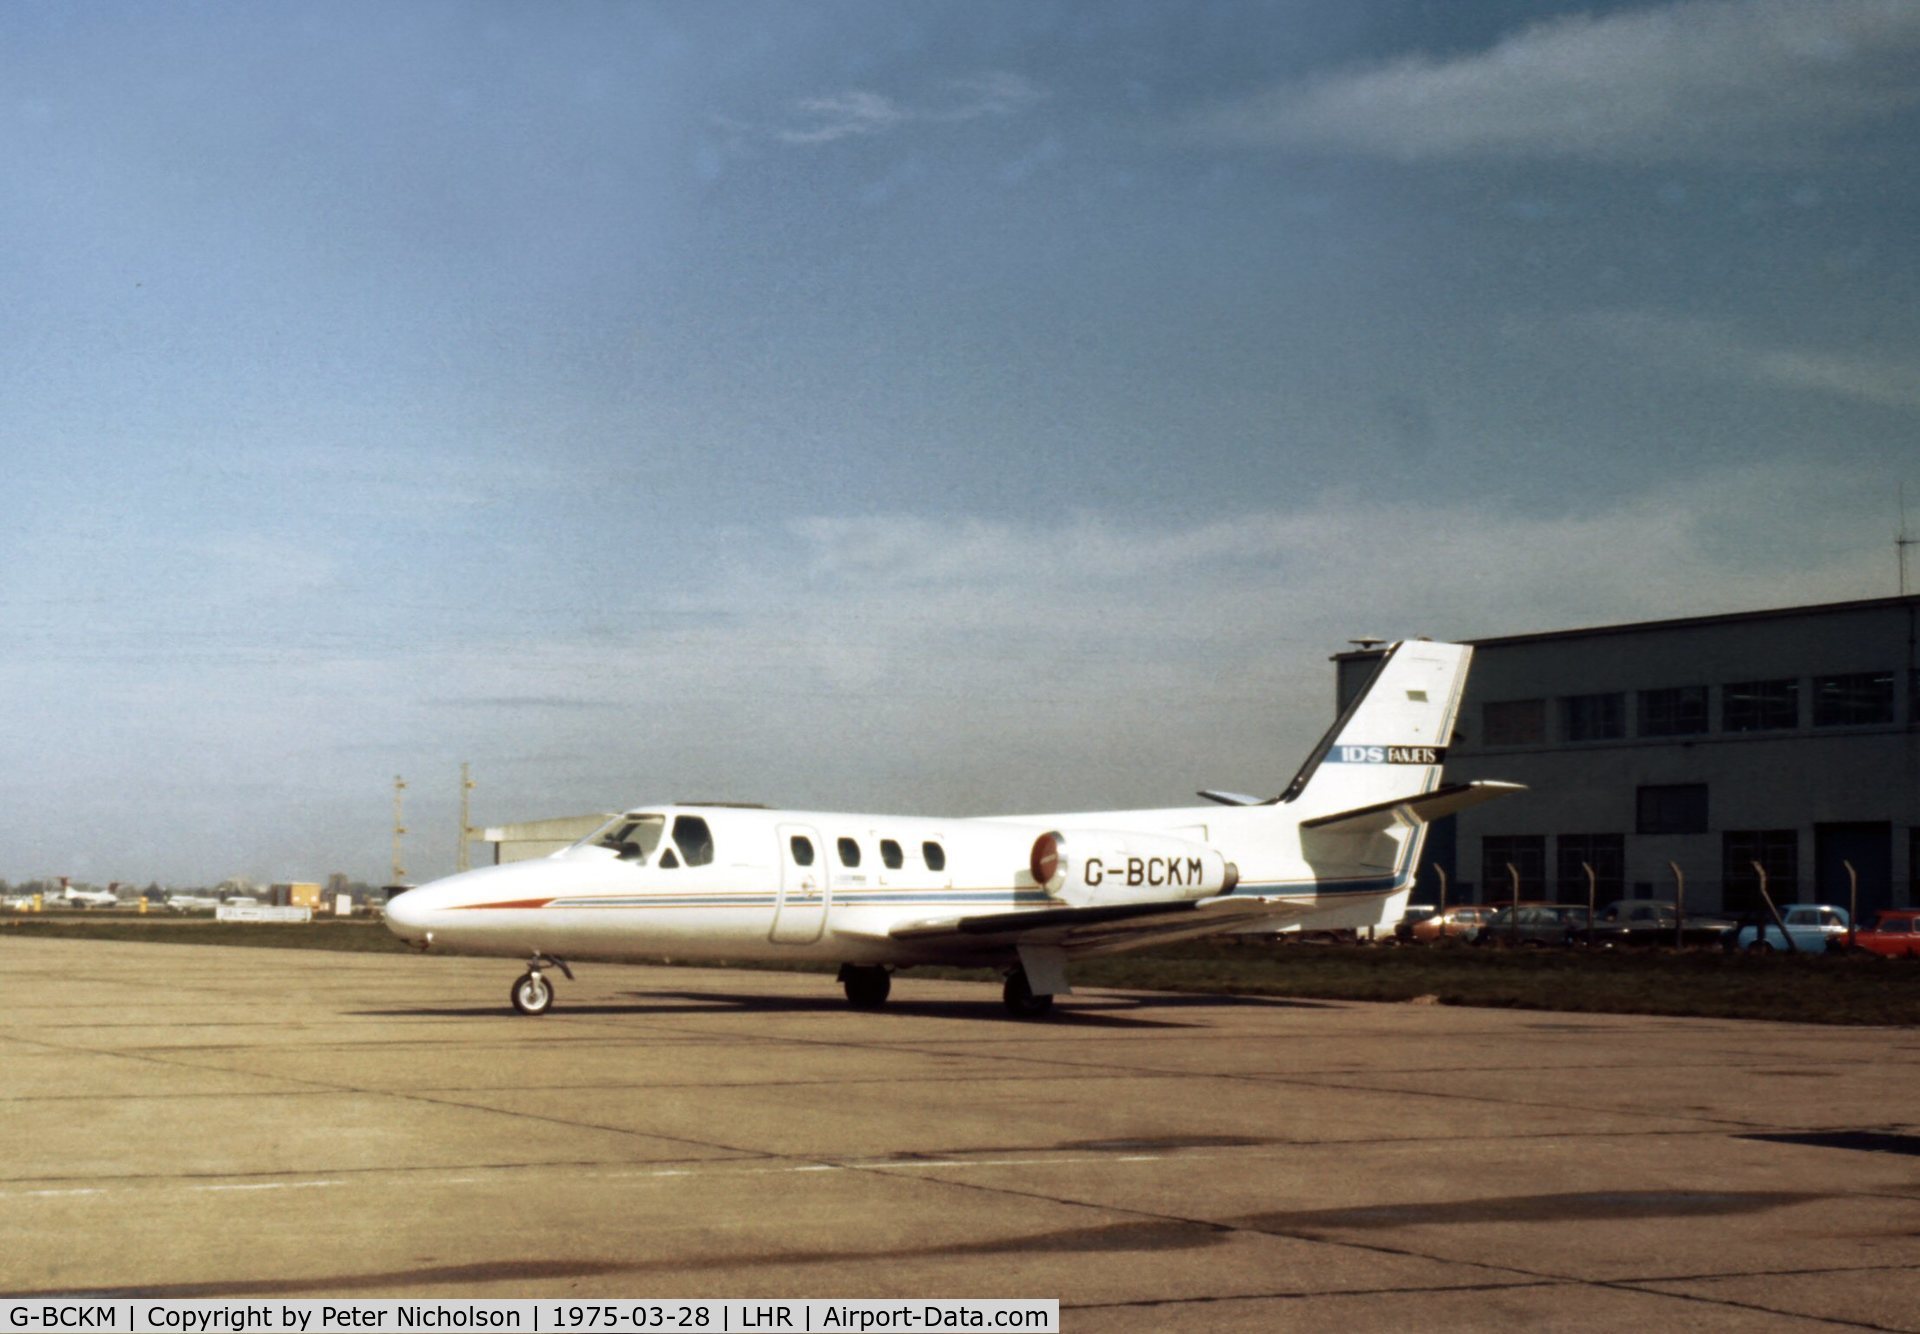 G-BCKM, 1974 Cessna 500 Citation C/N 500-0198, This Citation was parked at Heathrow in the Spring of 1975.